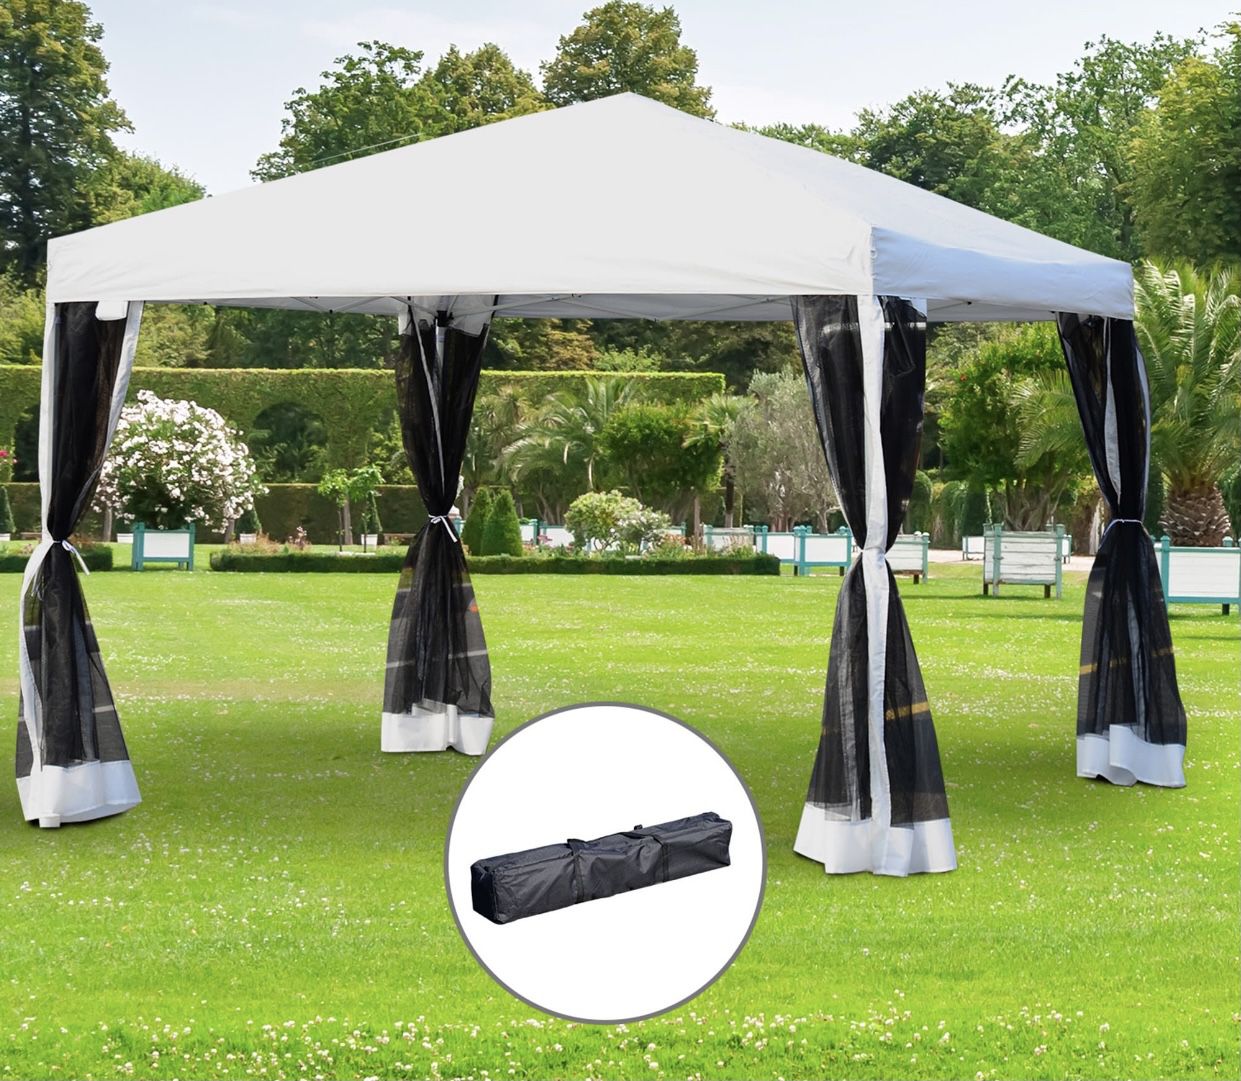 {ONE} Outsunny 10' x 10' Backyard Pop-up Canopy Shade Tent. 9.8 feet wide x 9.8 feet deep x 8.4 feet tall. MSRP $185. Our price $120 + sales tax  	